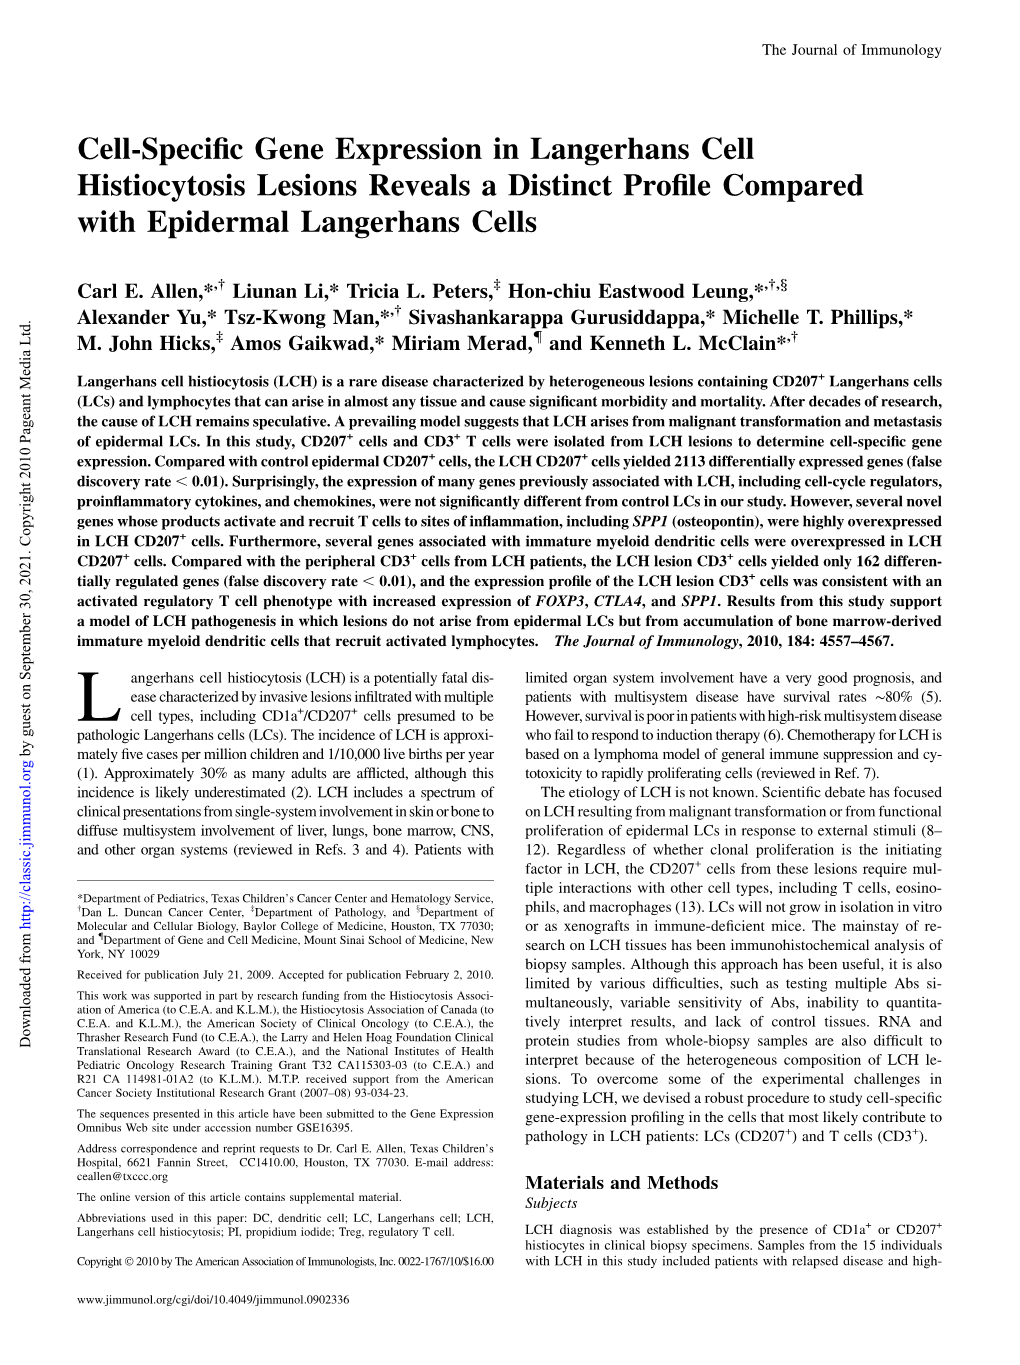 Langerhans Cells Profile Compared with Epidermal Cell Histiocytosis